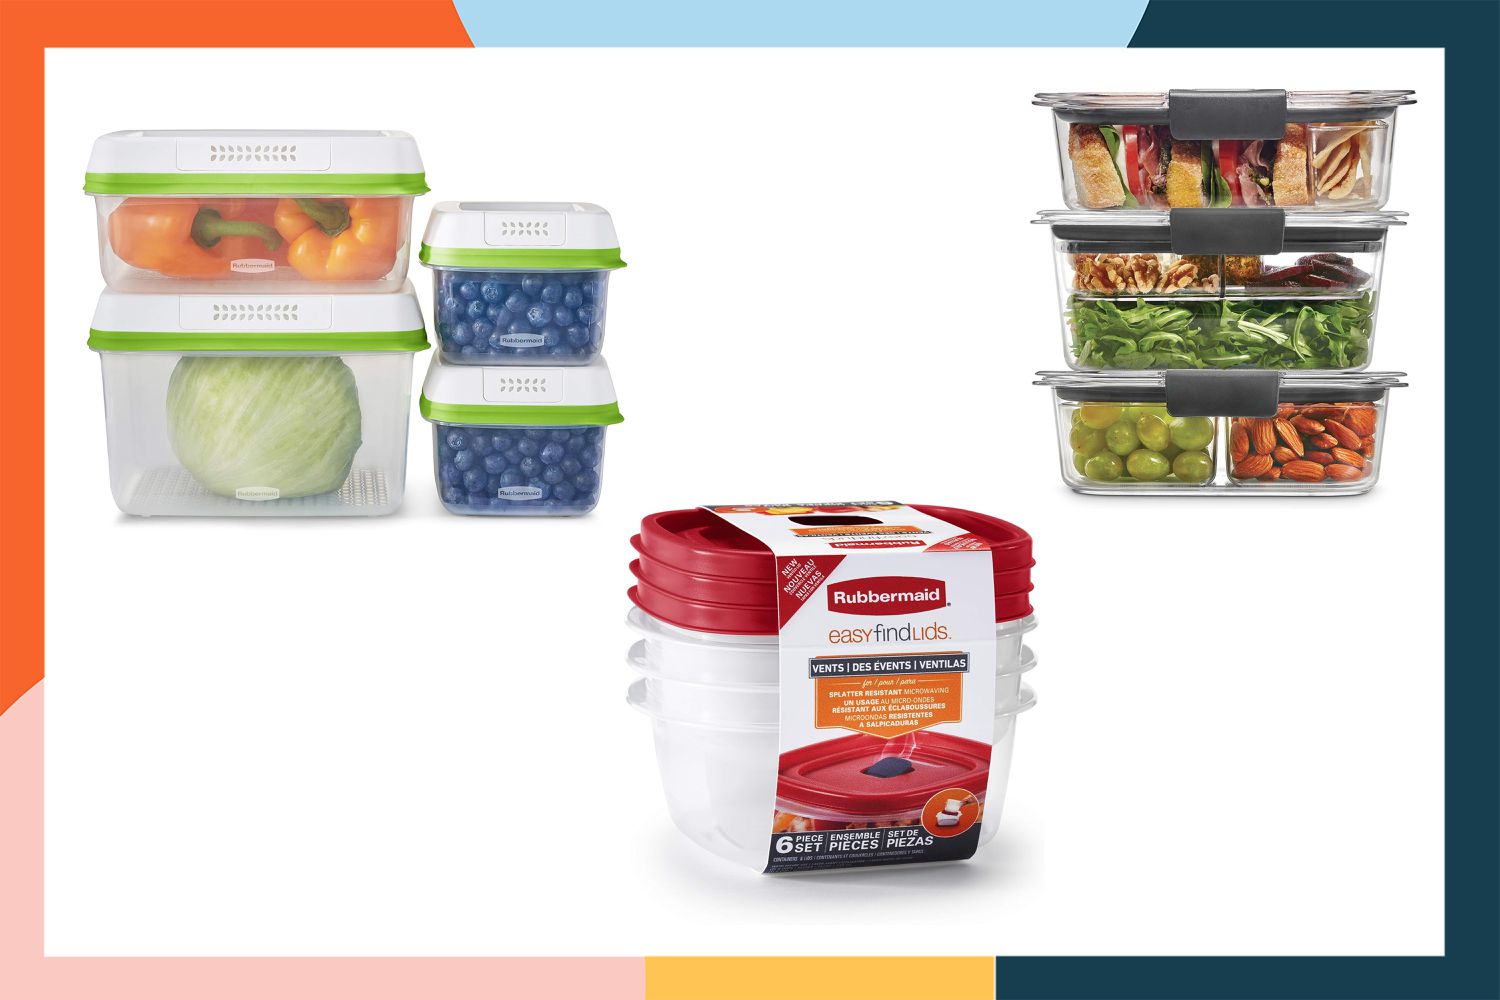 Rubbermaid Food Storage Containers Are Secretly on Sale at Amazon [Video]